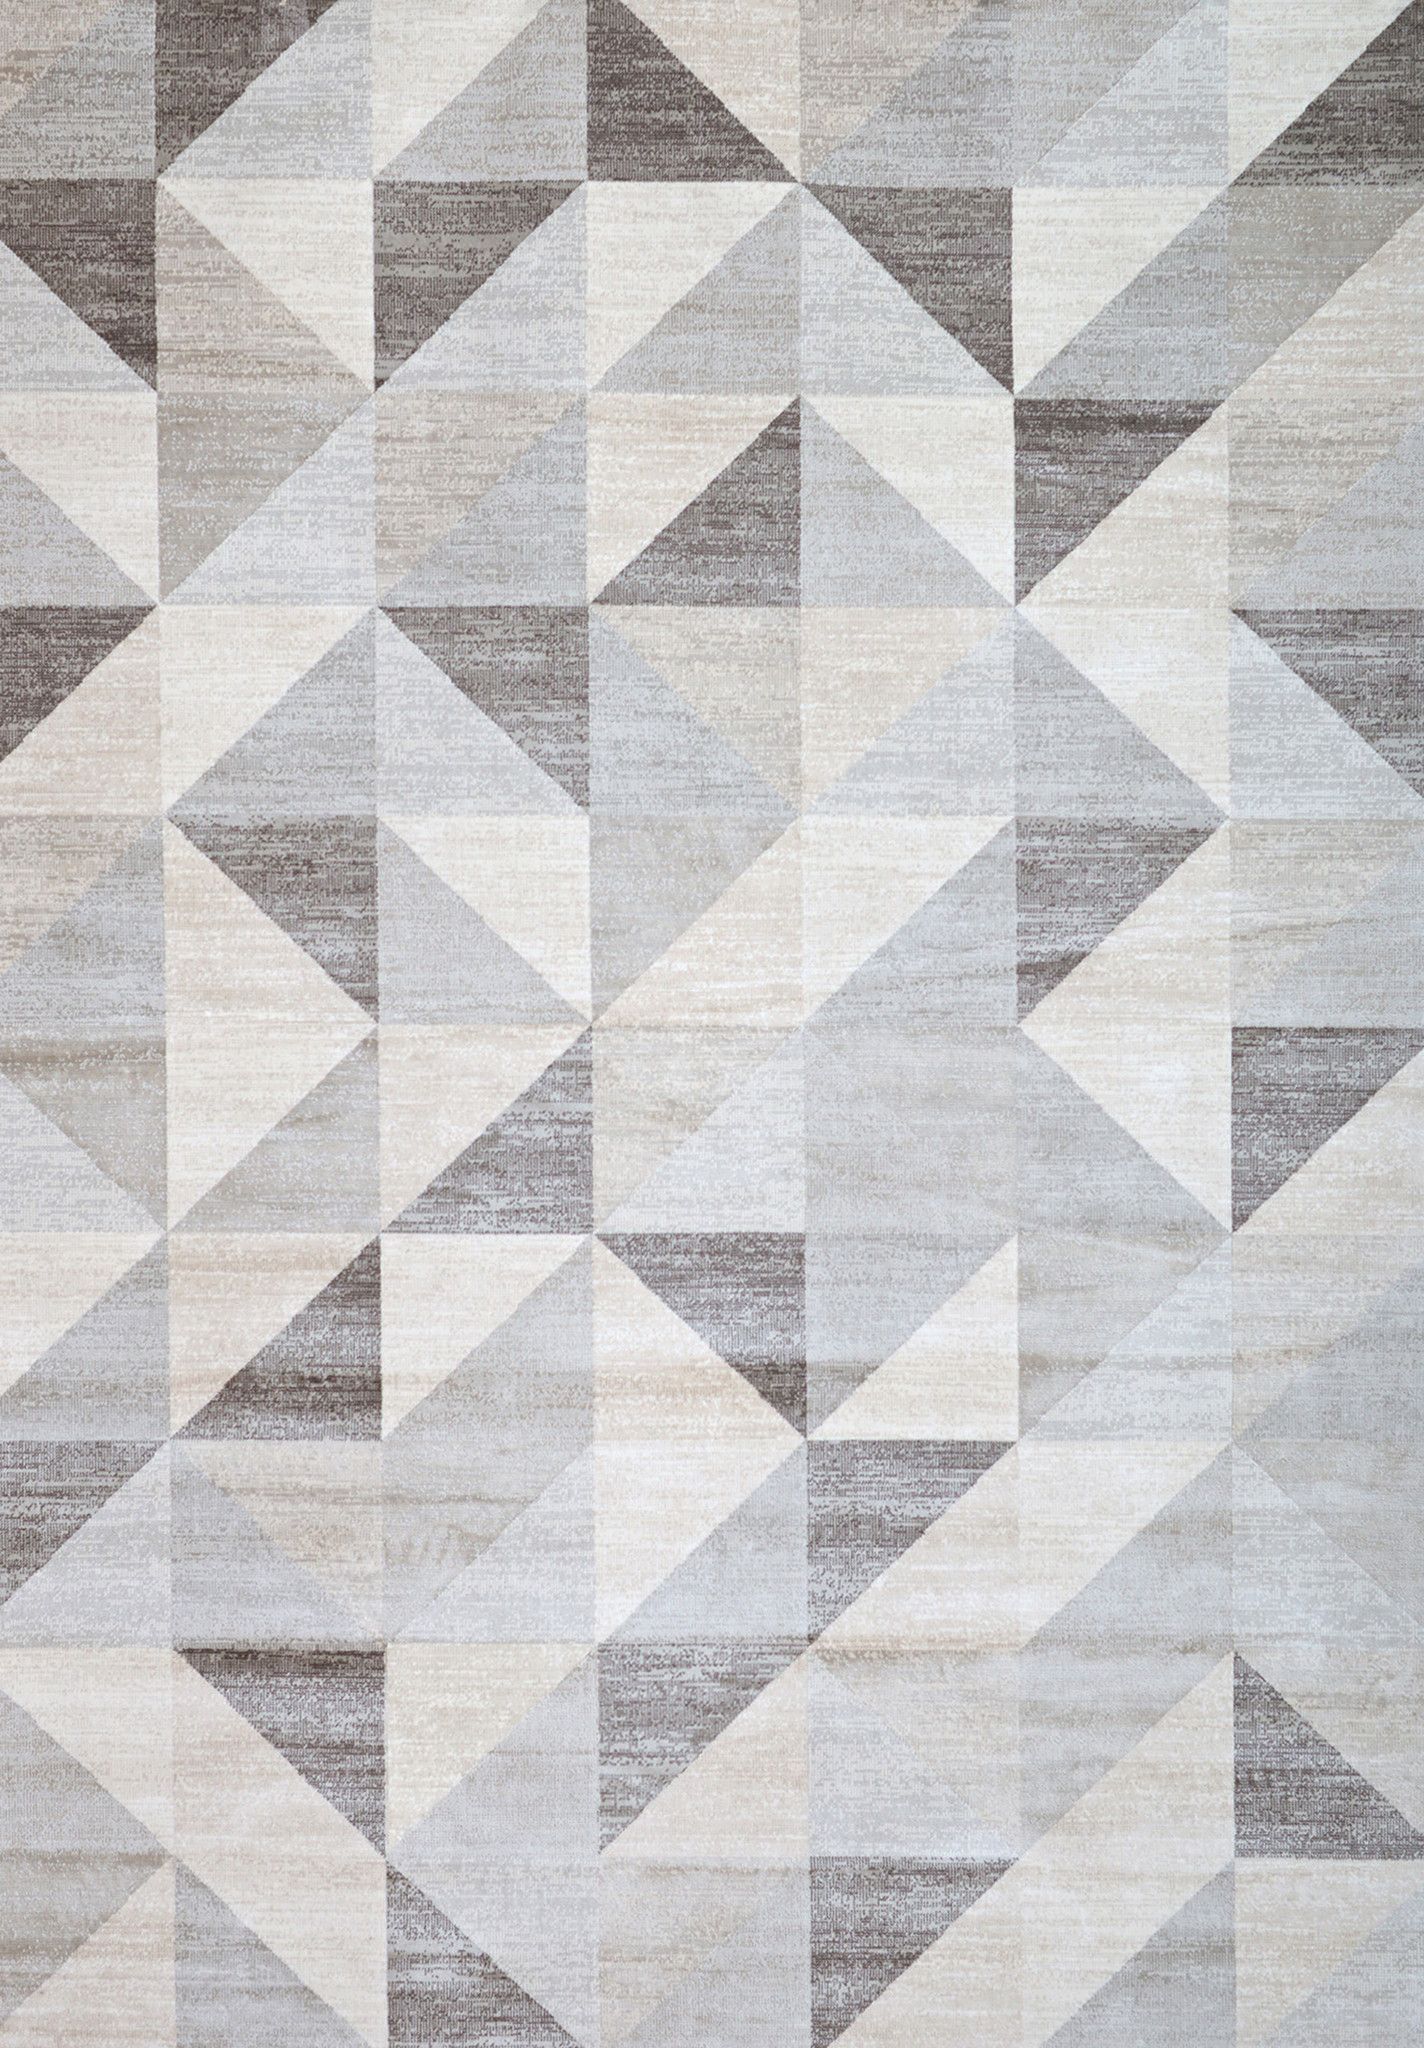 Silver Gray and White Modern Geometric Triangle Pattern Rug from Woodwaves